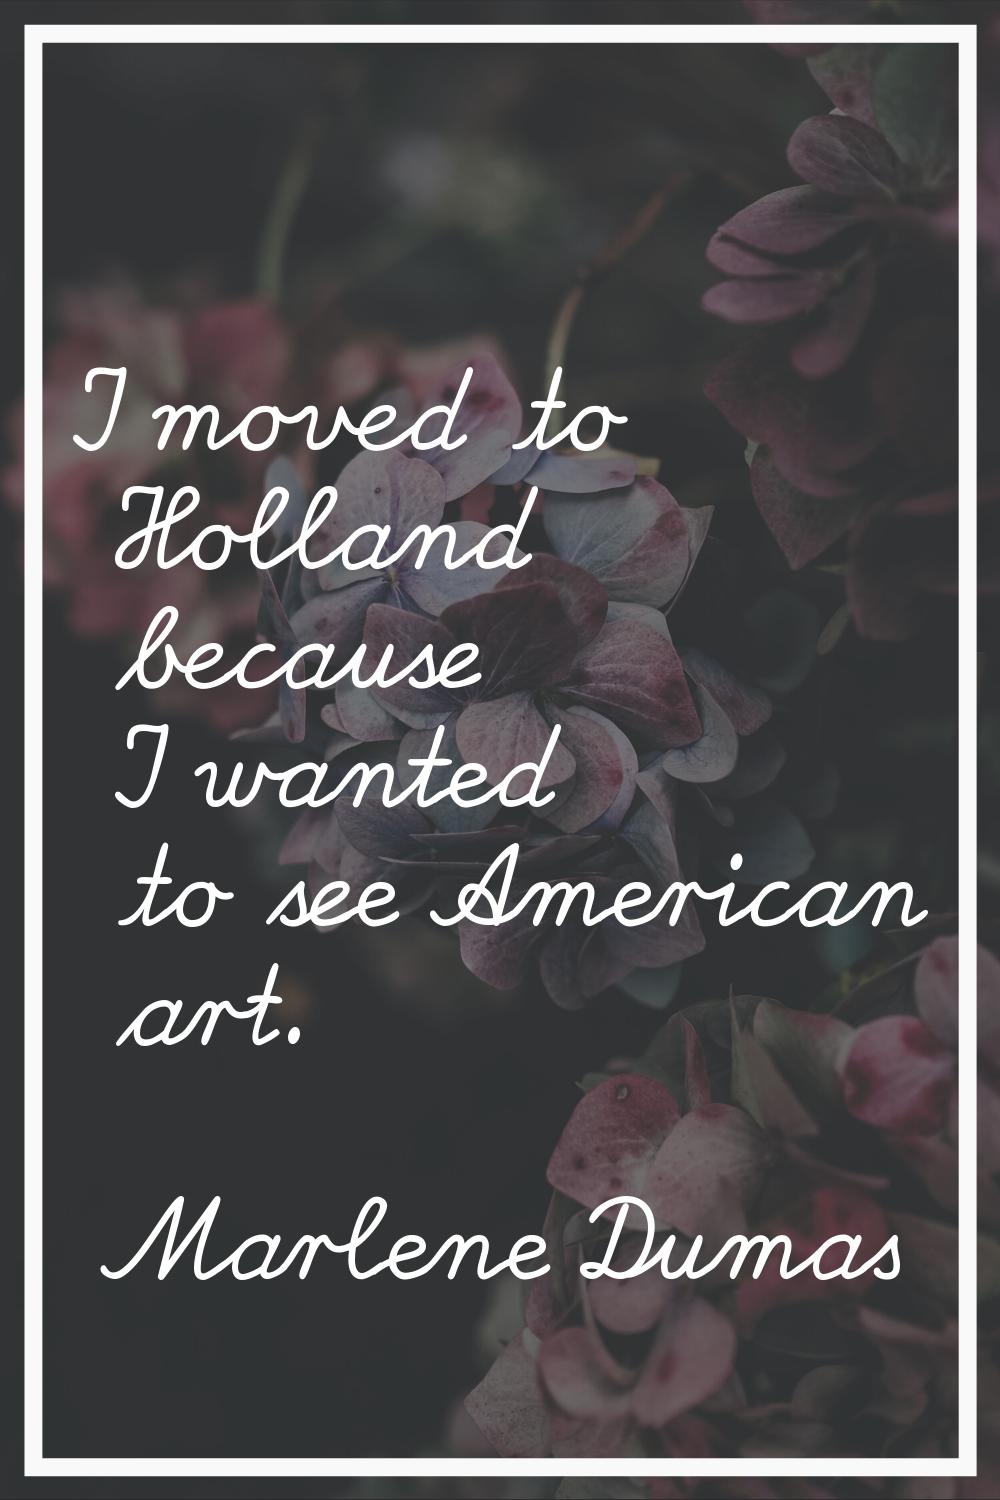 I moved to Holland because I wanted to see American art.